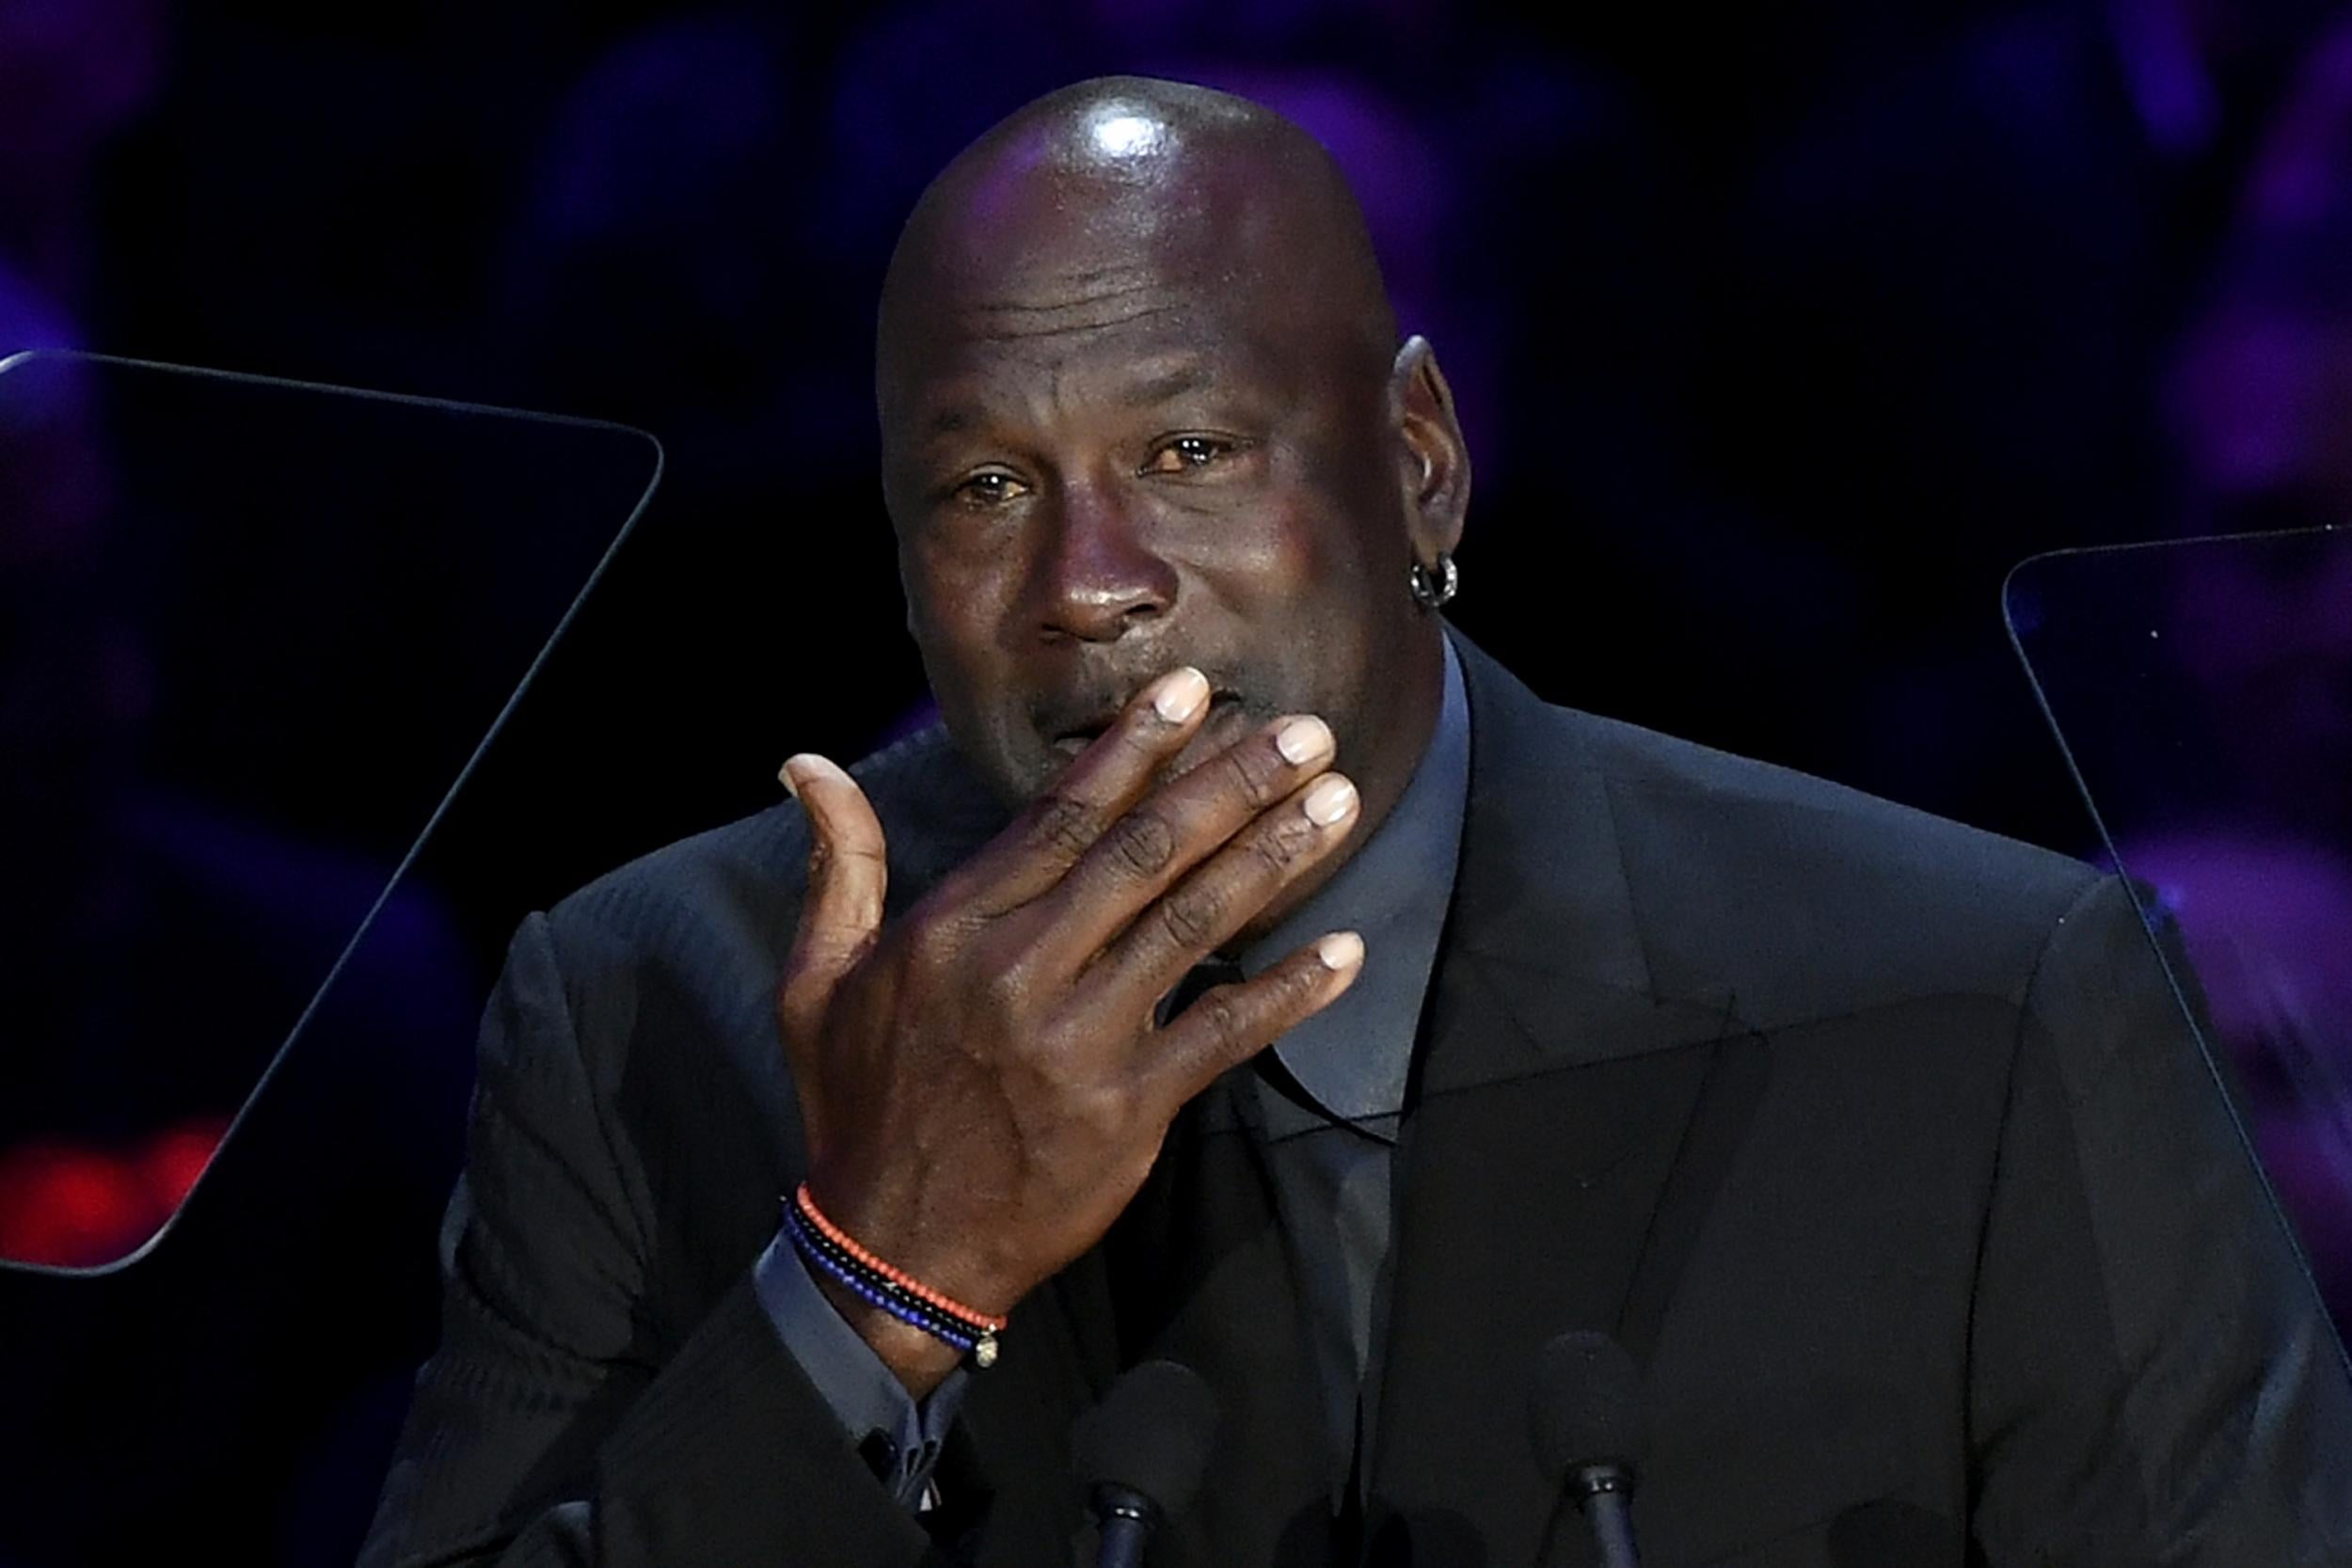 Michael Jordan gives tearful eulogy for Kobe Bryant at Staples Center memorial: 'Rest in peace little brother'